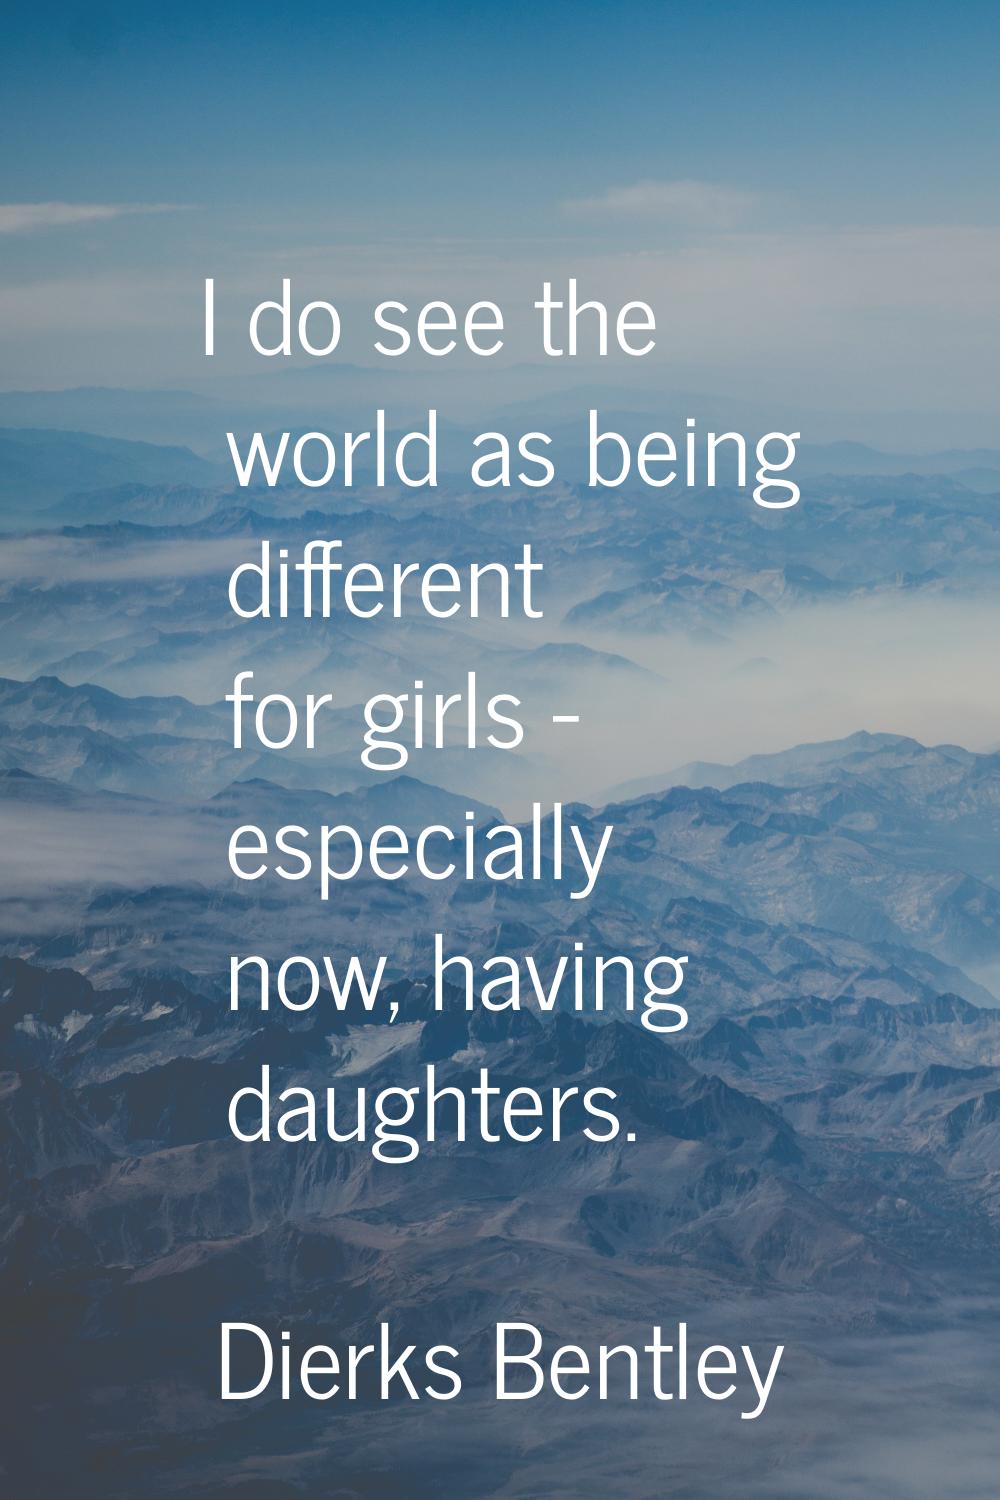 I do see the world as being different for girls - especially now, having daughters.